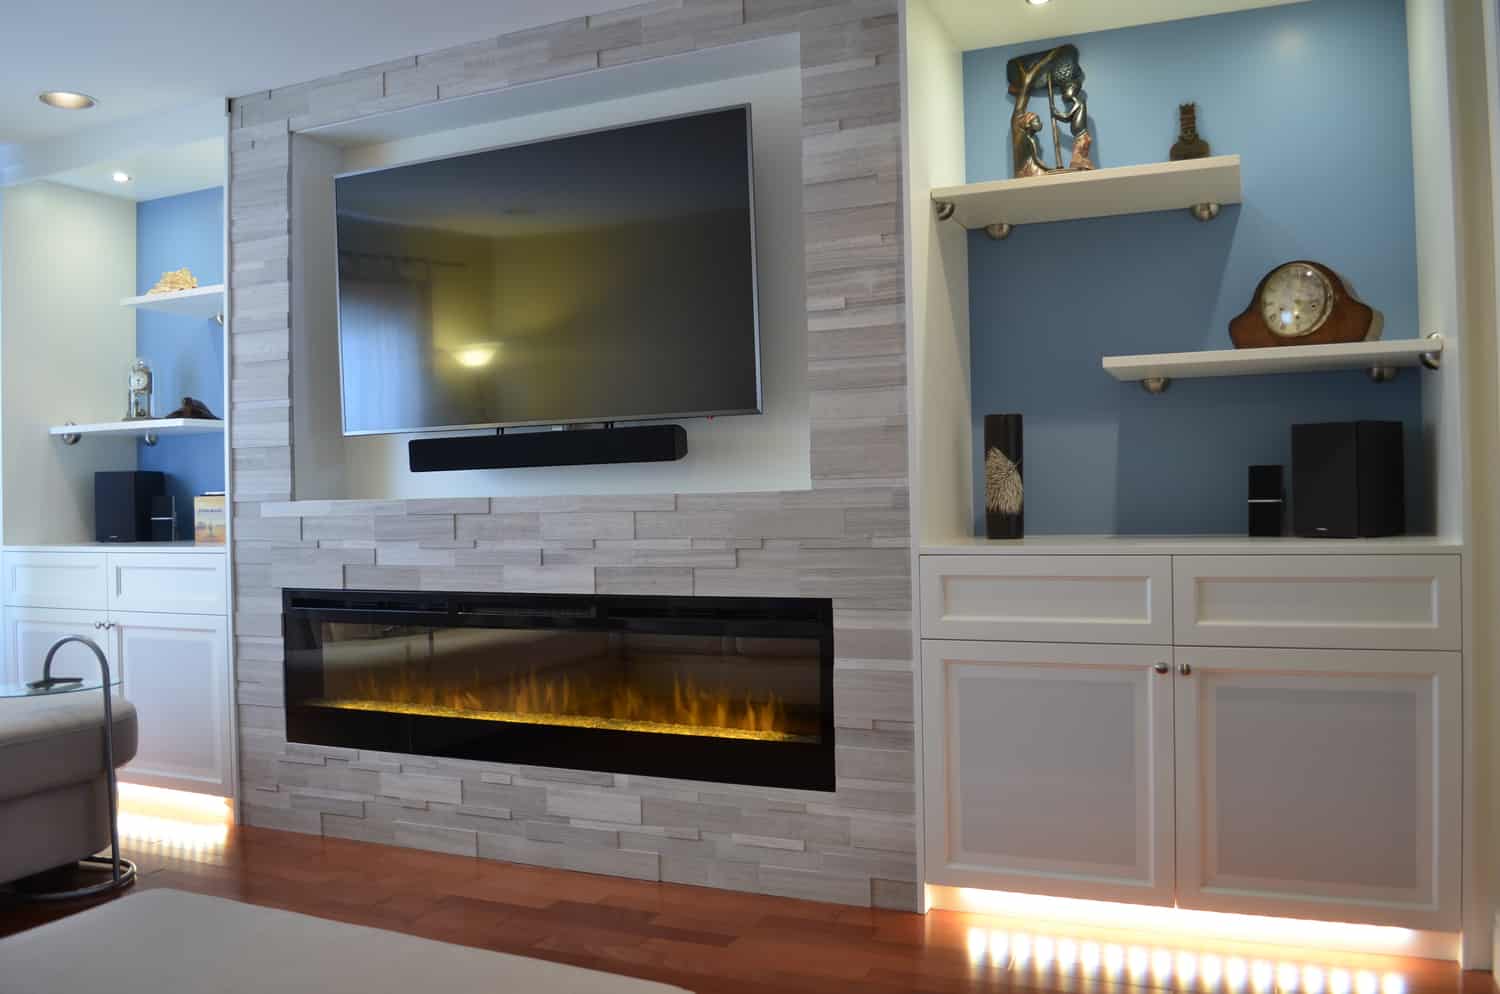 How to convert a wood-burning fireplace to electric.